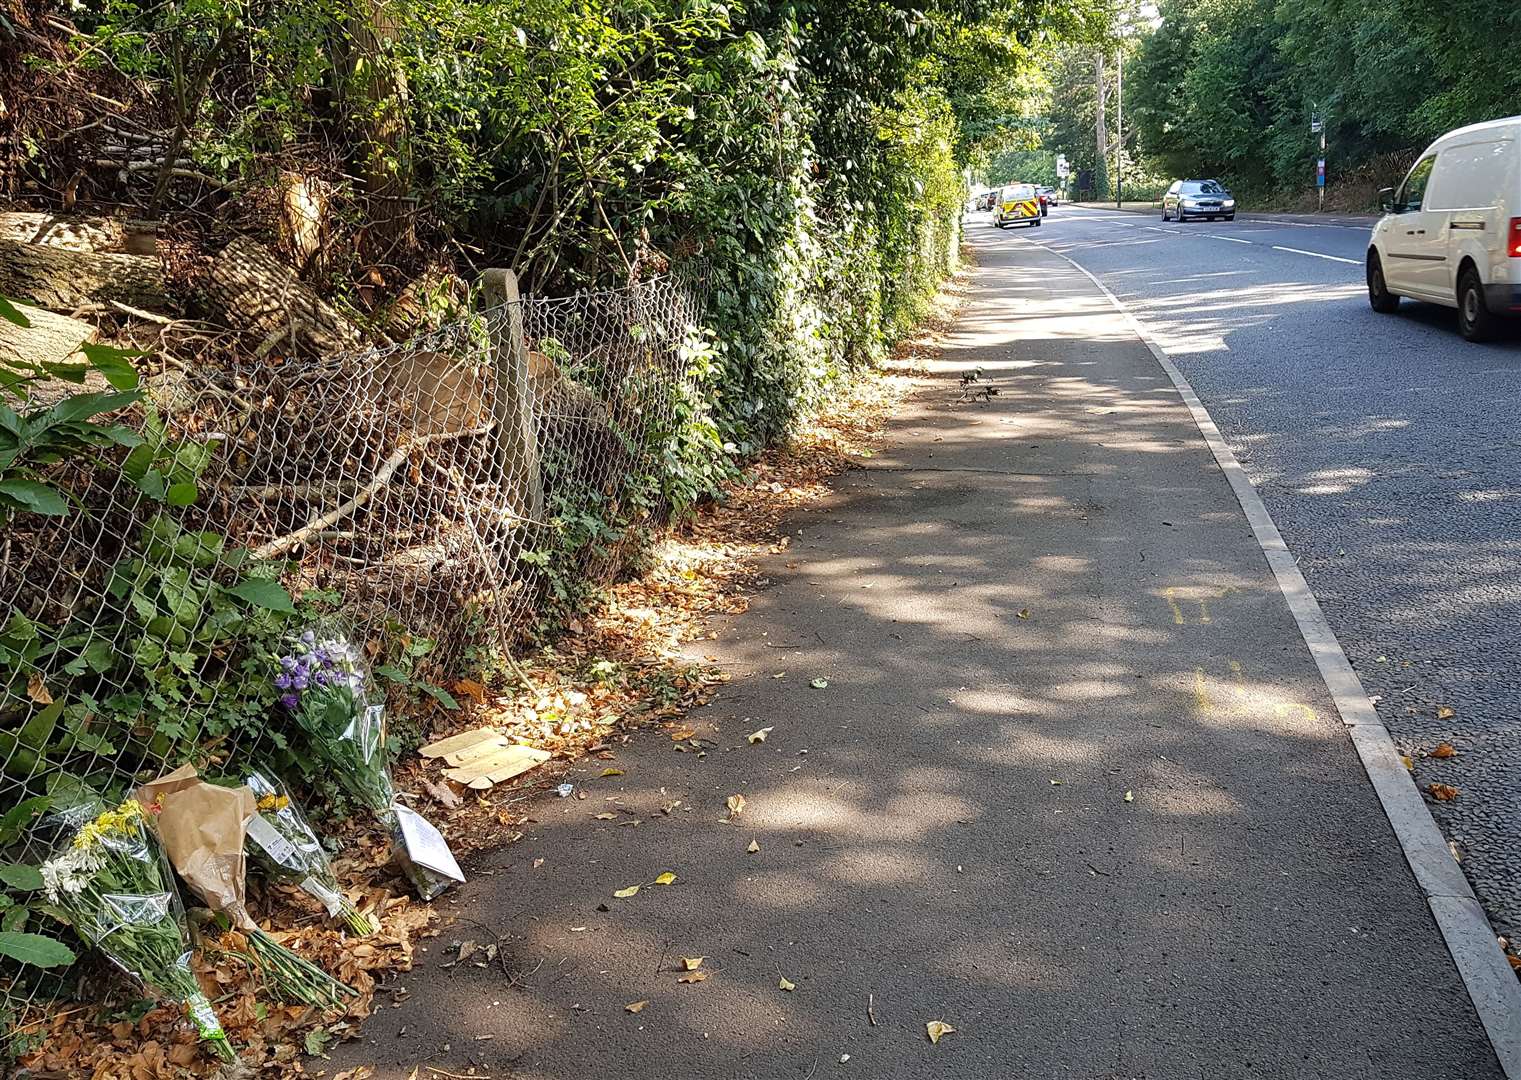 Floral tributes were left at the spot where Anthony Gower died on Pembury Road in Tonbridge